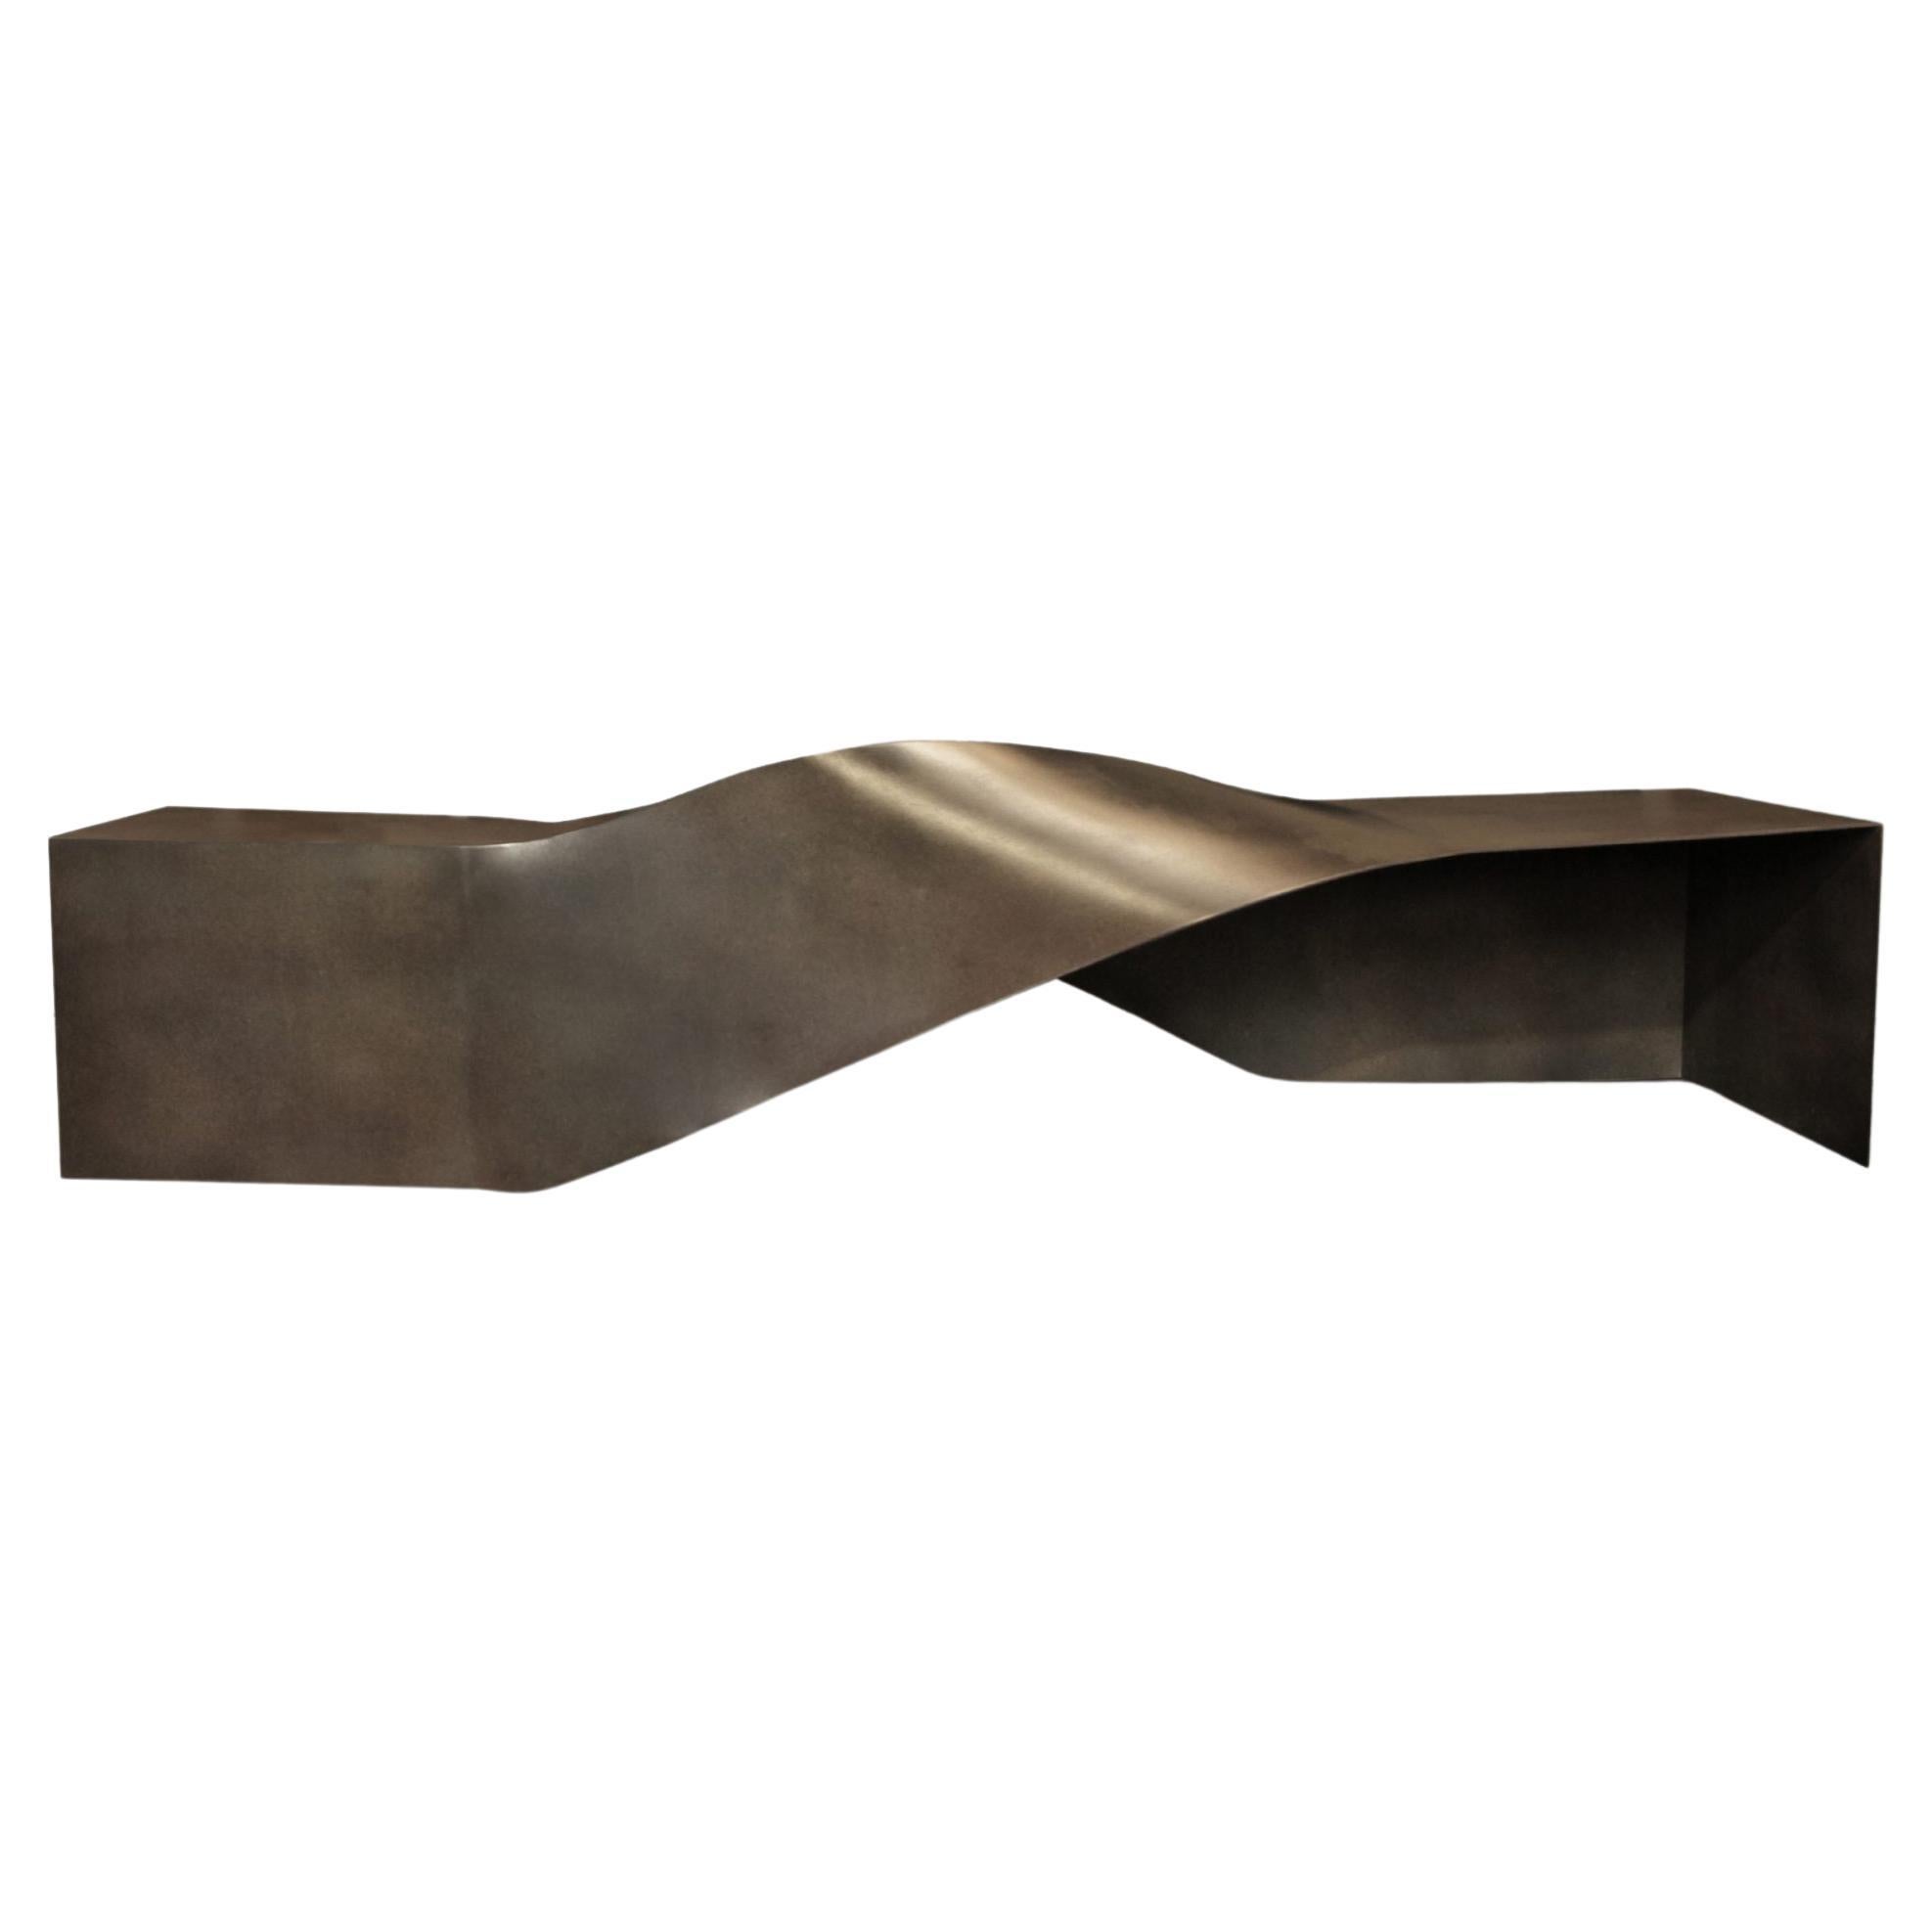 Soul Sculpture Bench in Natural Brass Large by Veronica Mar